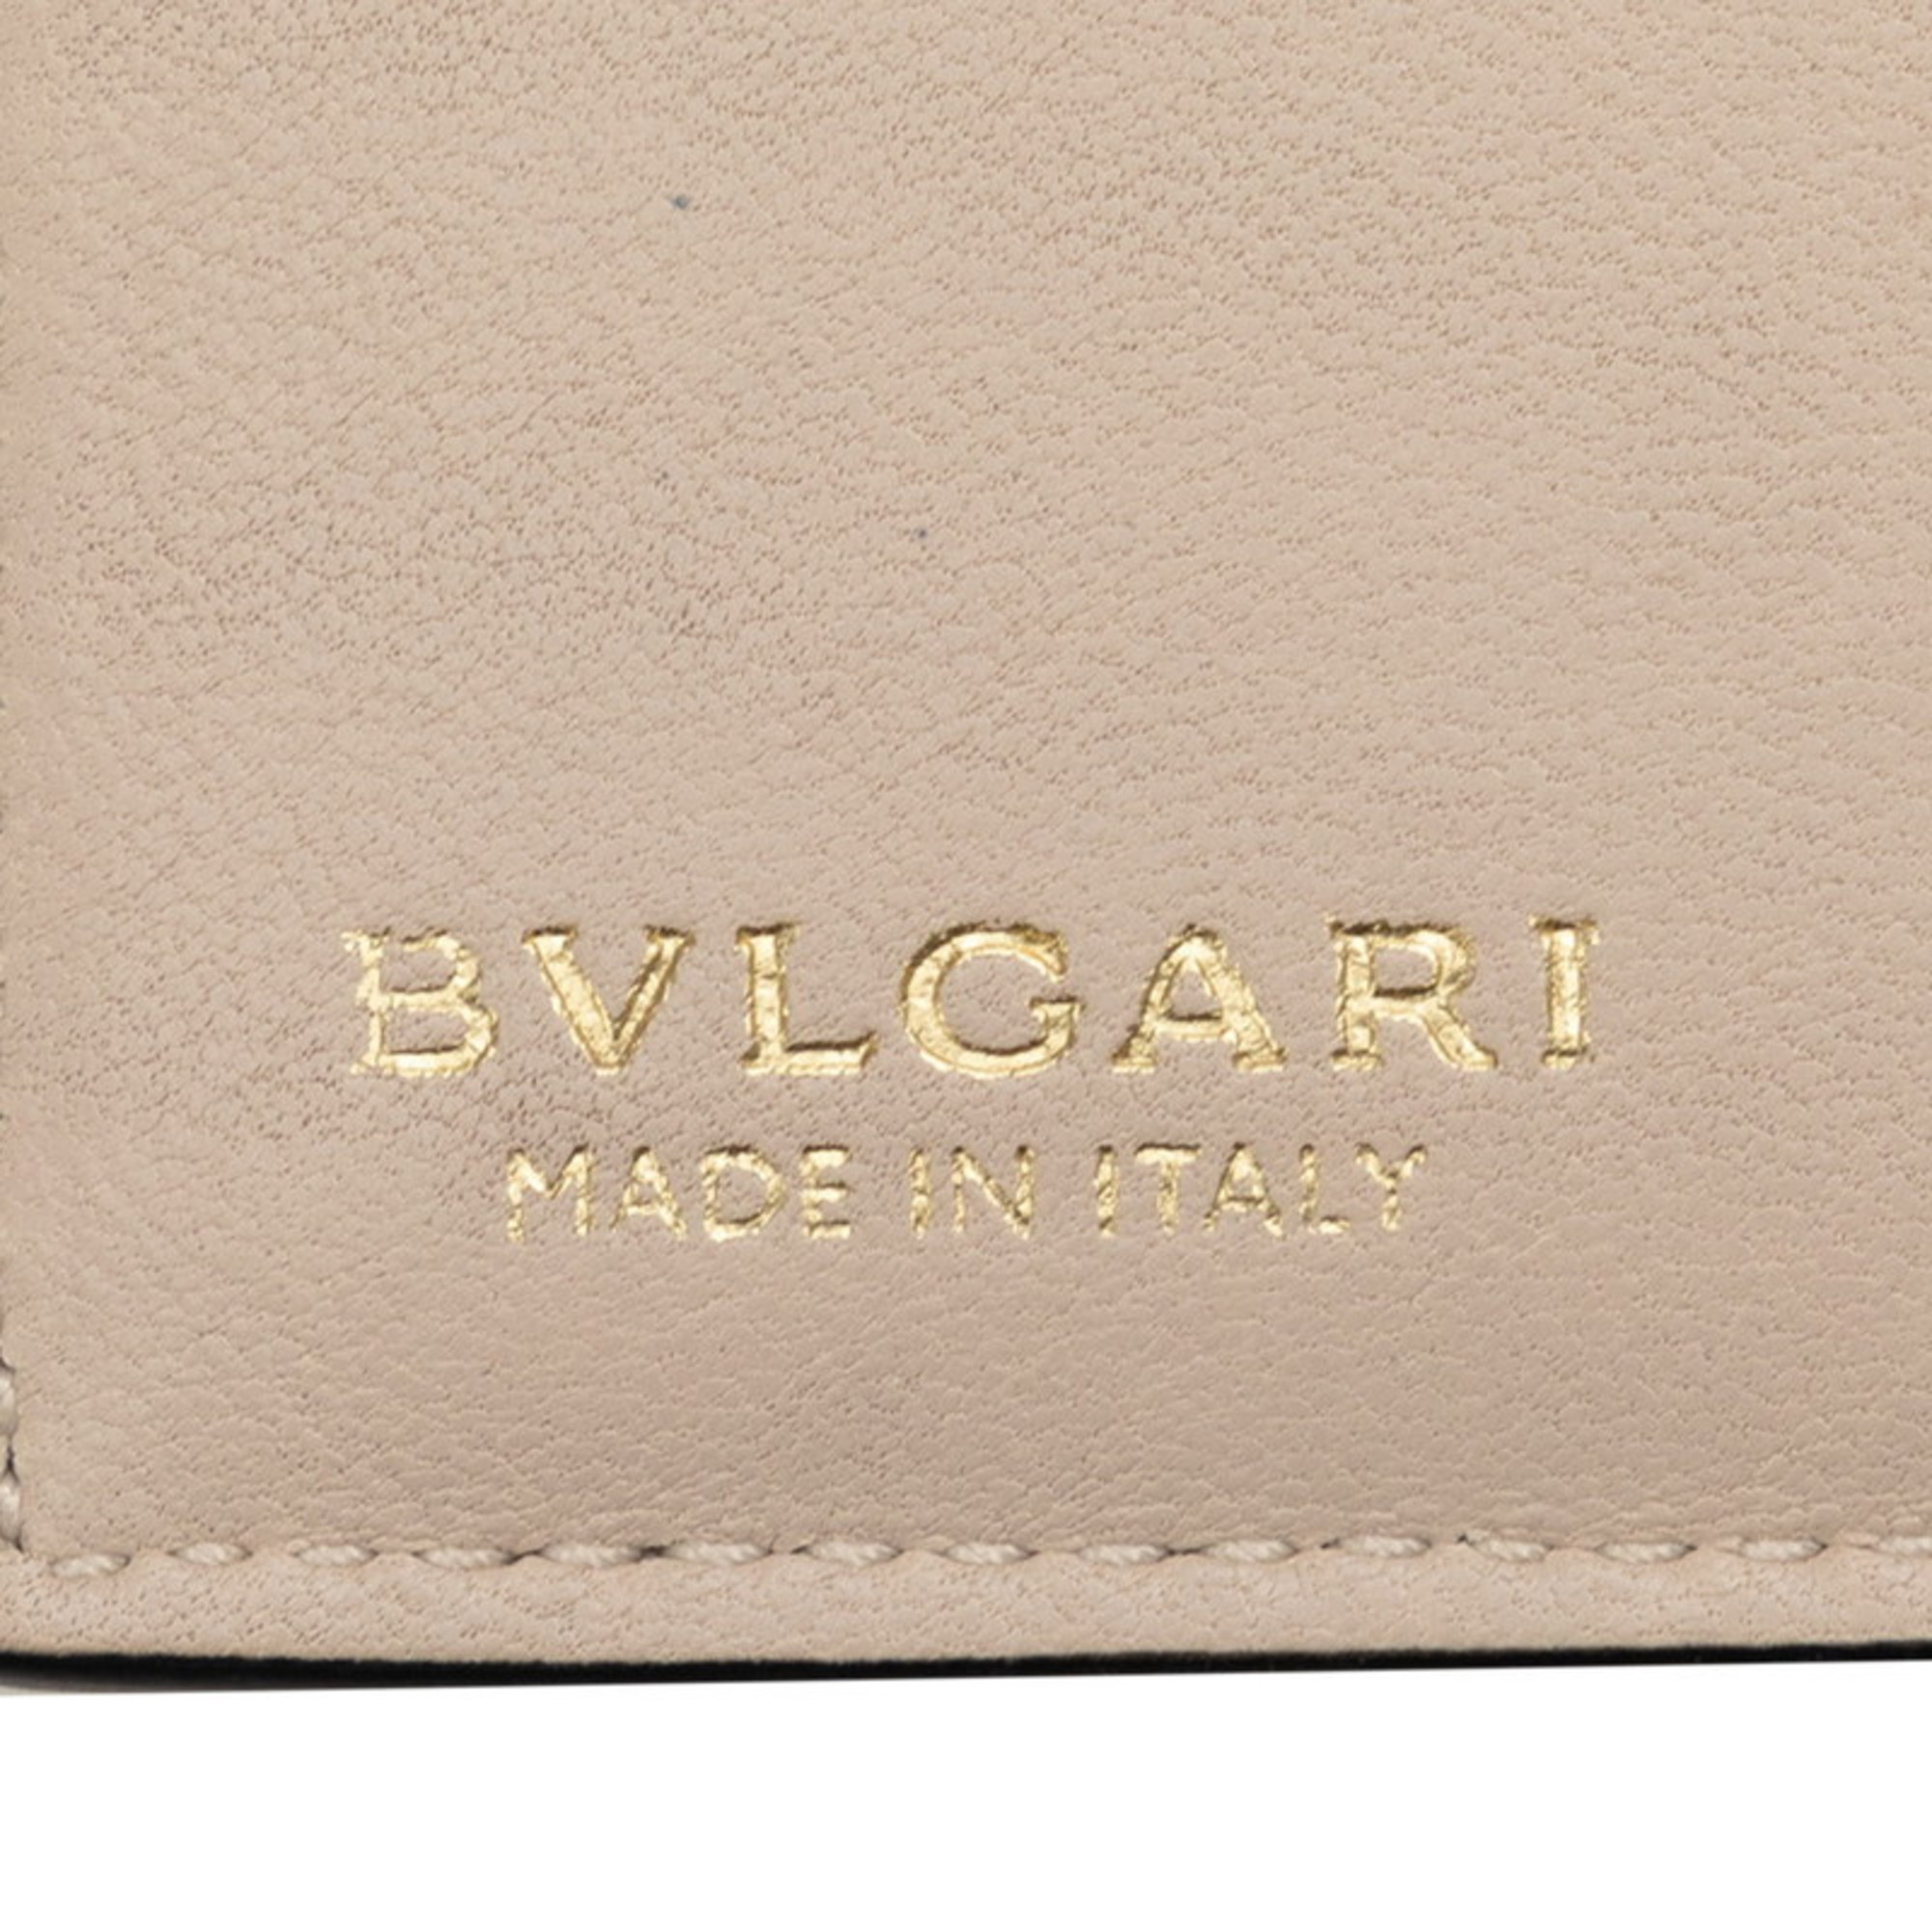 BVLGARI Milky Over Tri-fold Wallet Compact 289351 Gold Leather Women's